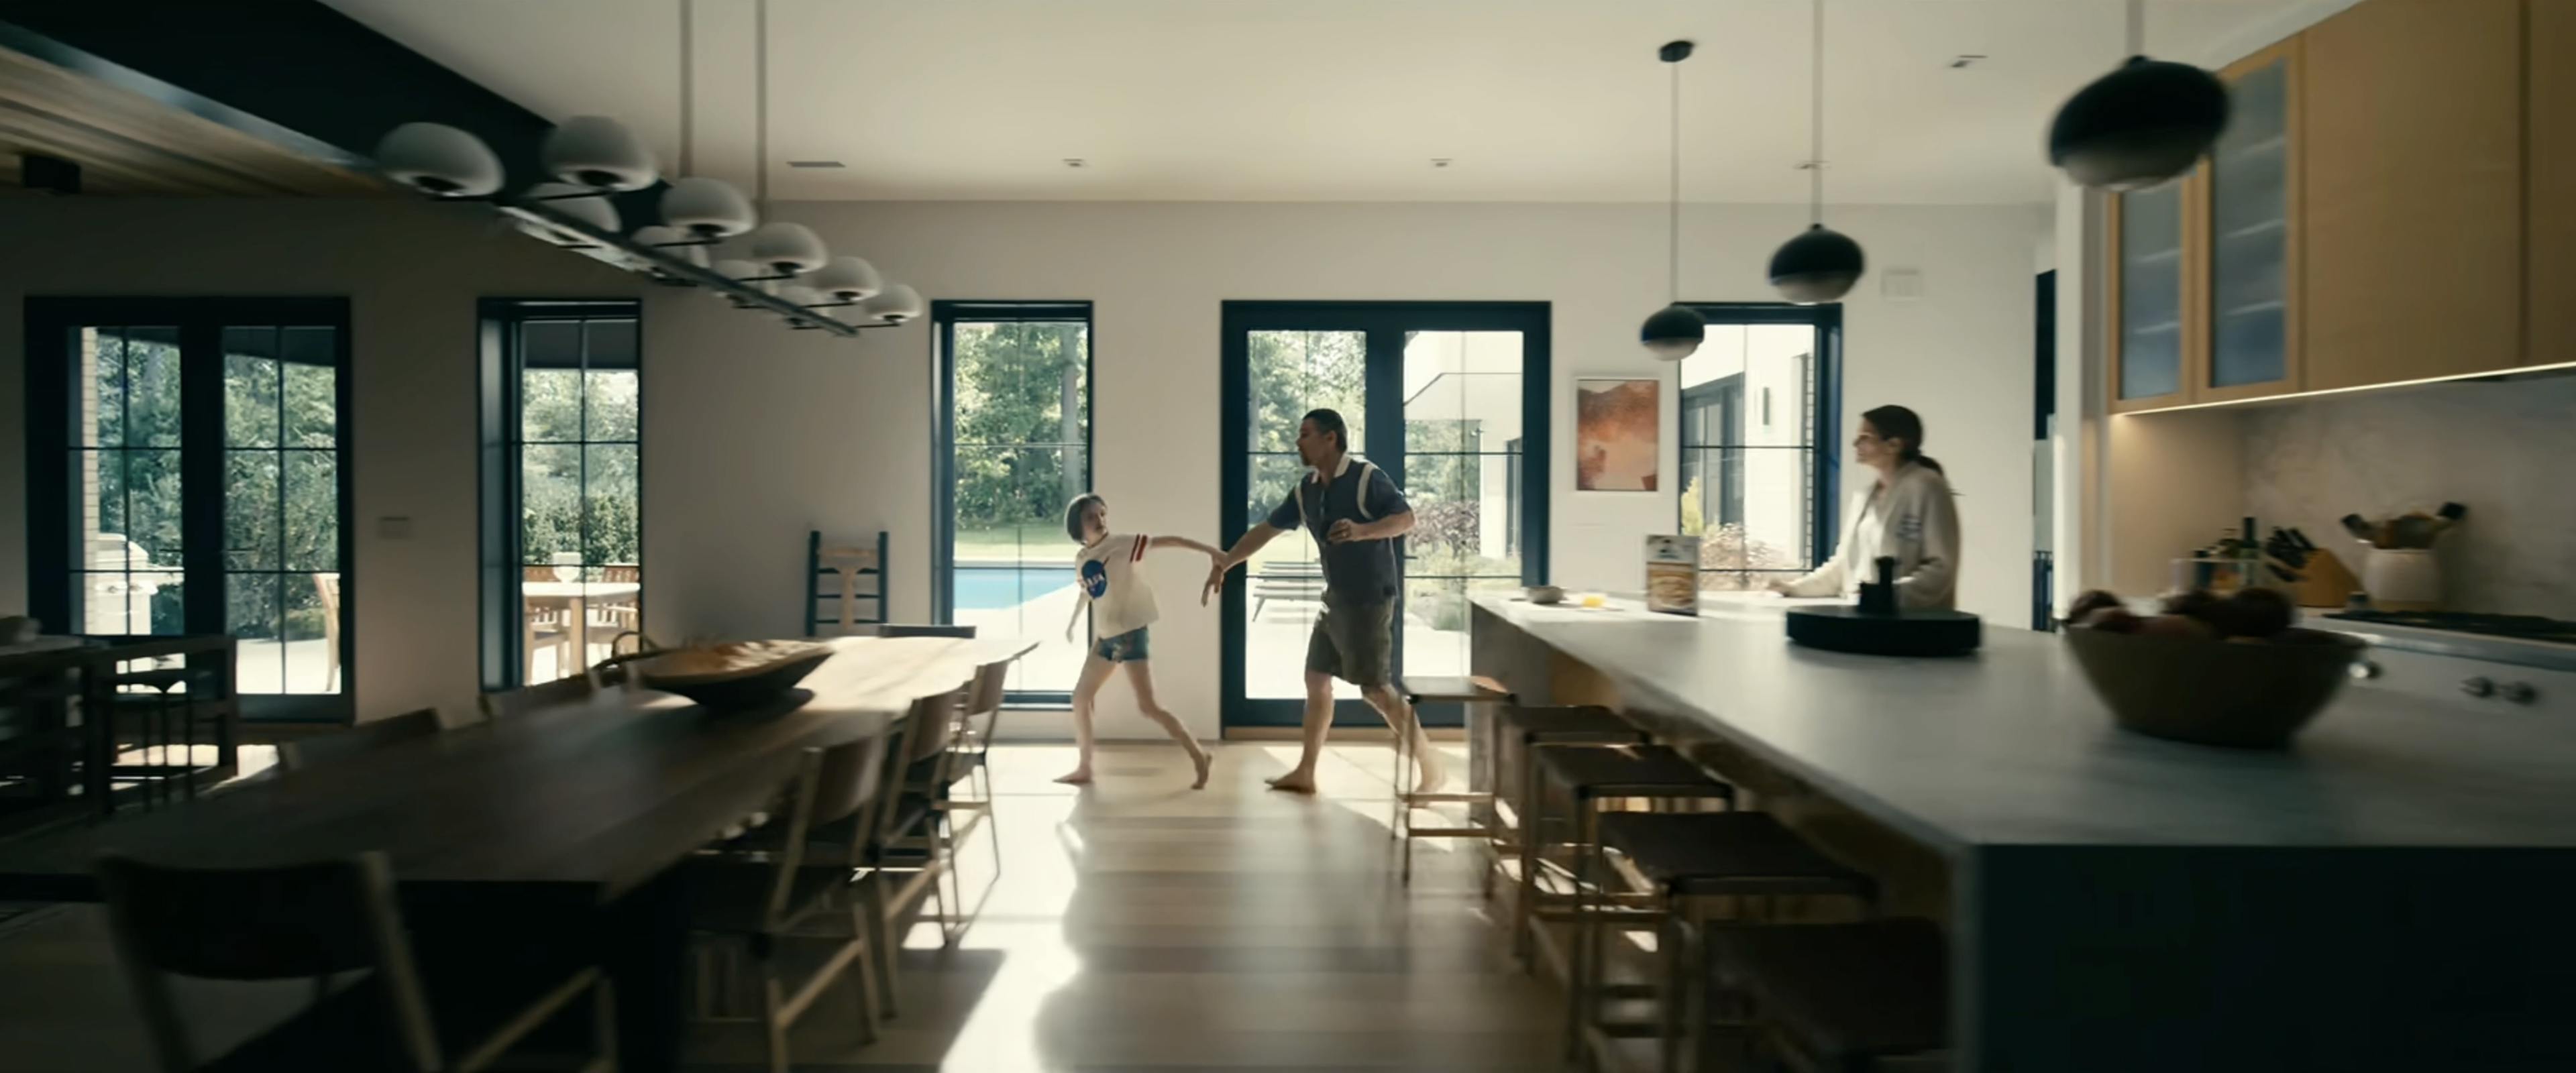 A red painting by artist Misato Suzuki in a film still of a modern kitchen from the Netflix movie, Leave the World Behind, featuring actors Julia Roberts and Ethan Hawke.